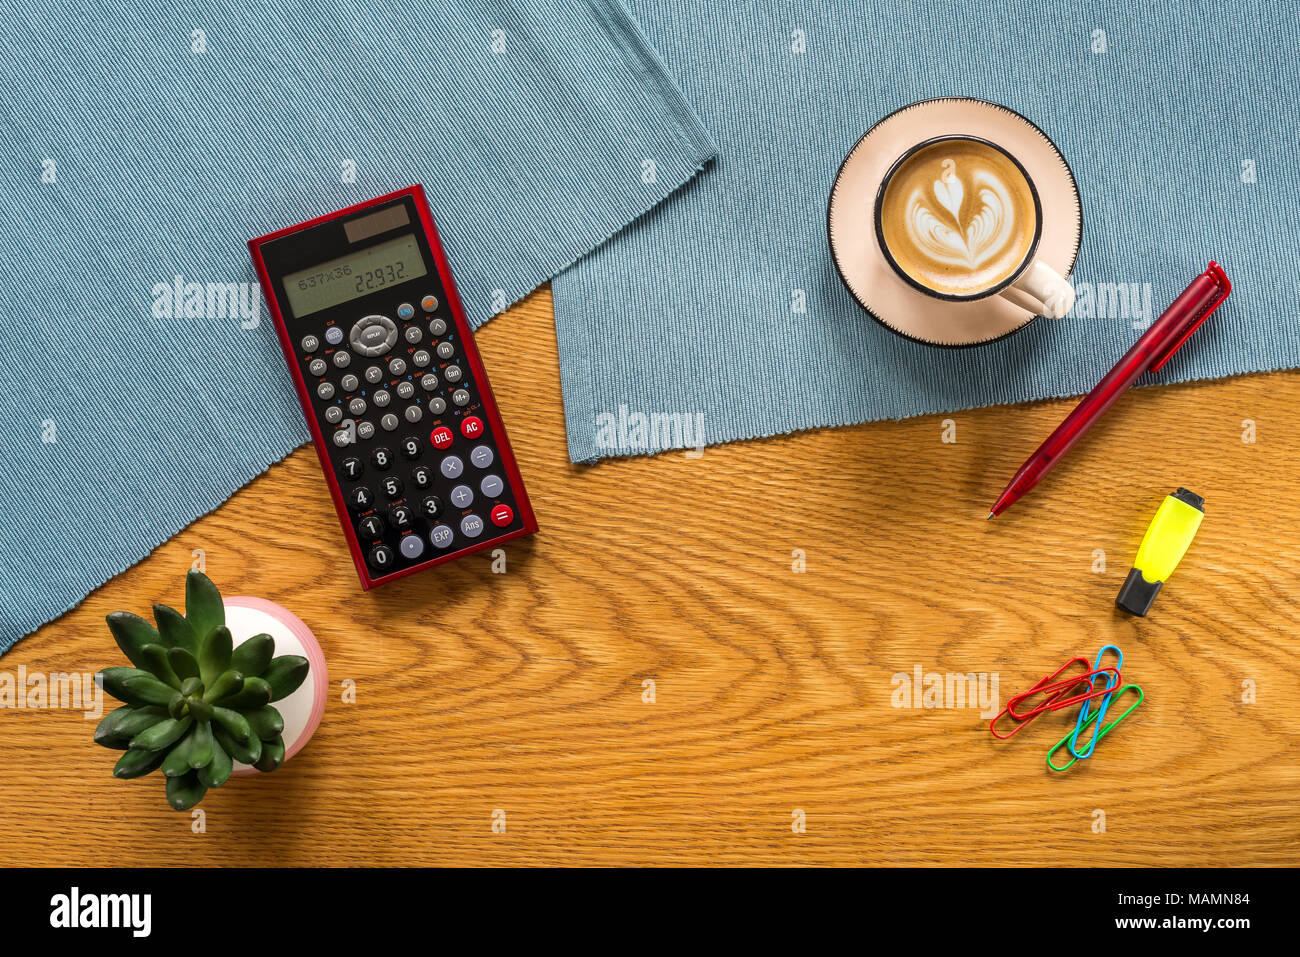 Accountant workspace as flat lay from above with numbers in calculator, plant, marker pen, paper clips and coffee with wooden background Stock Photo